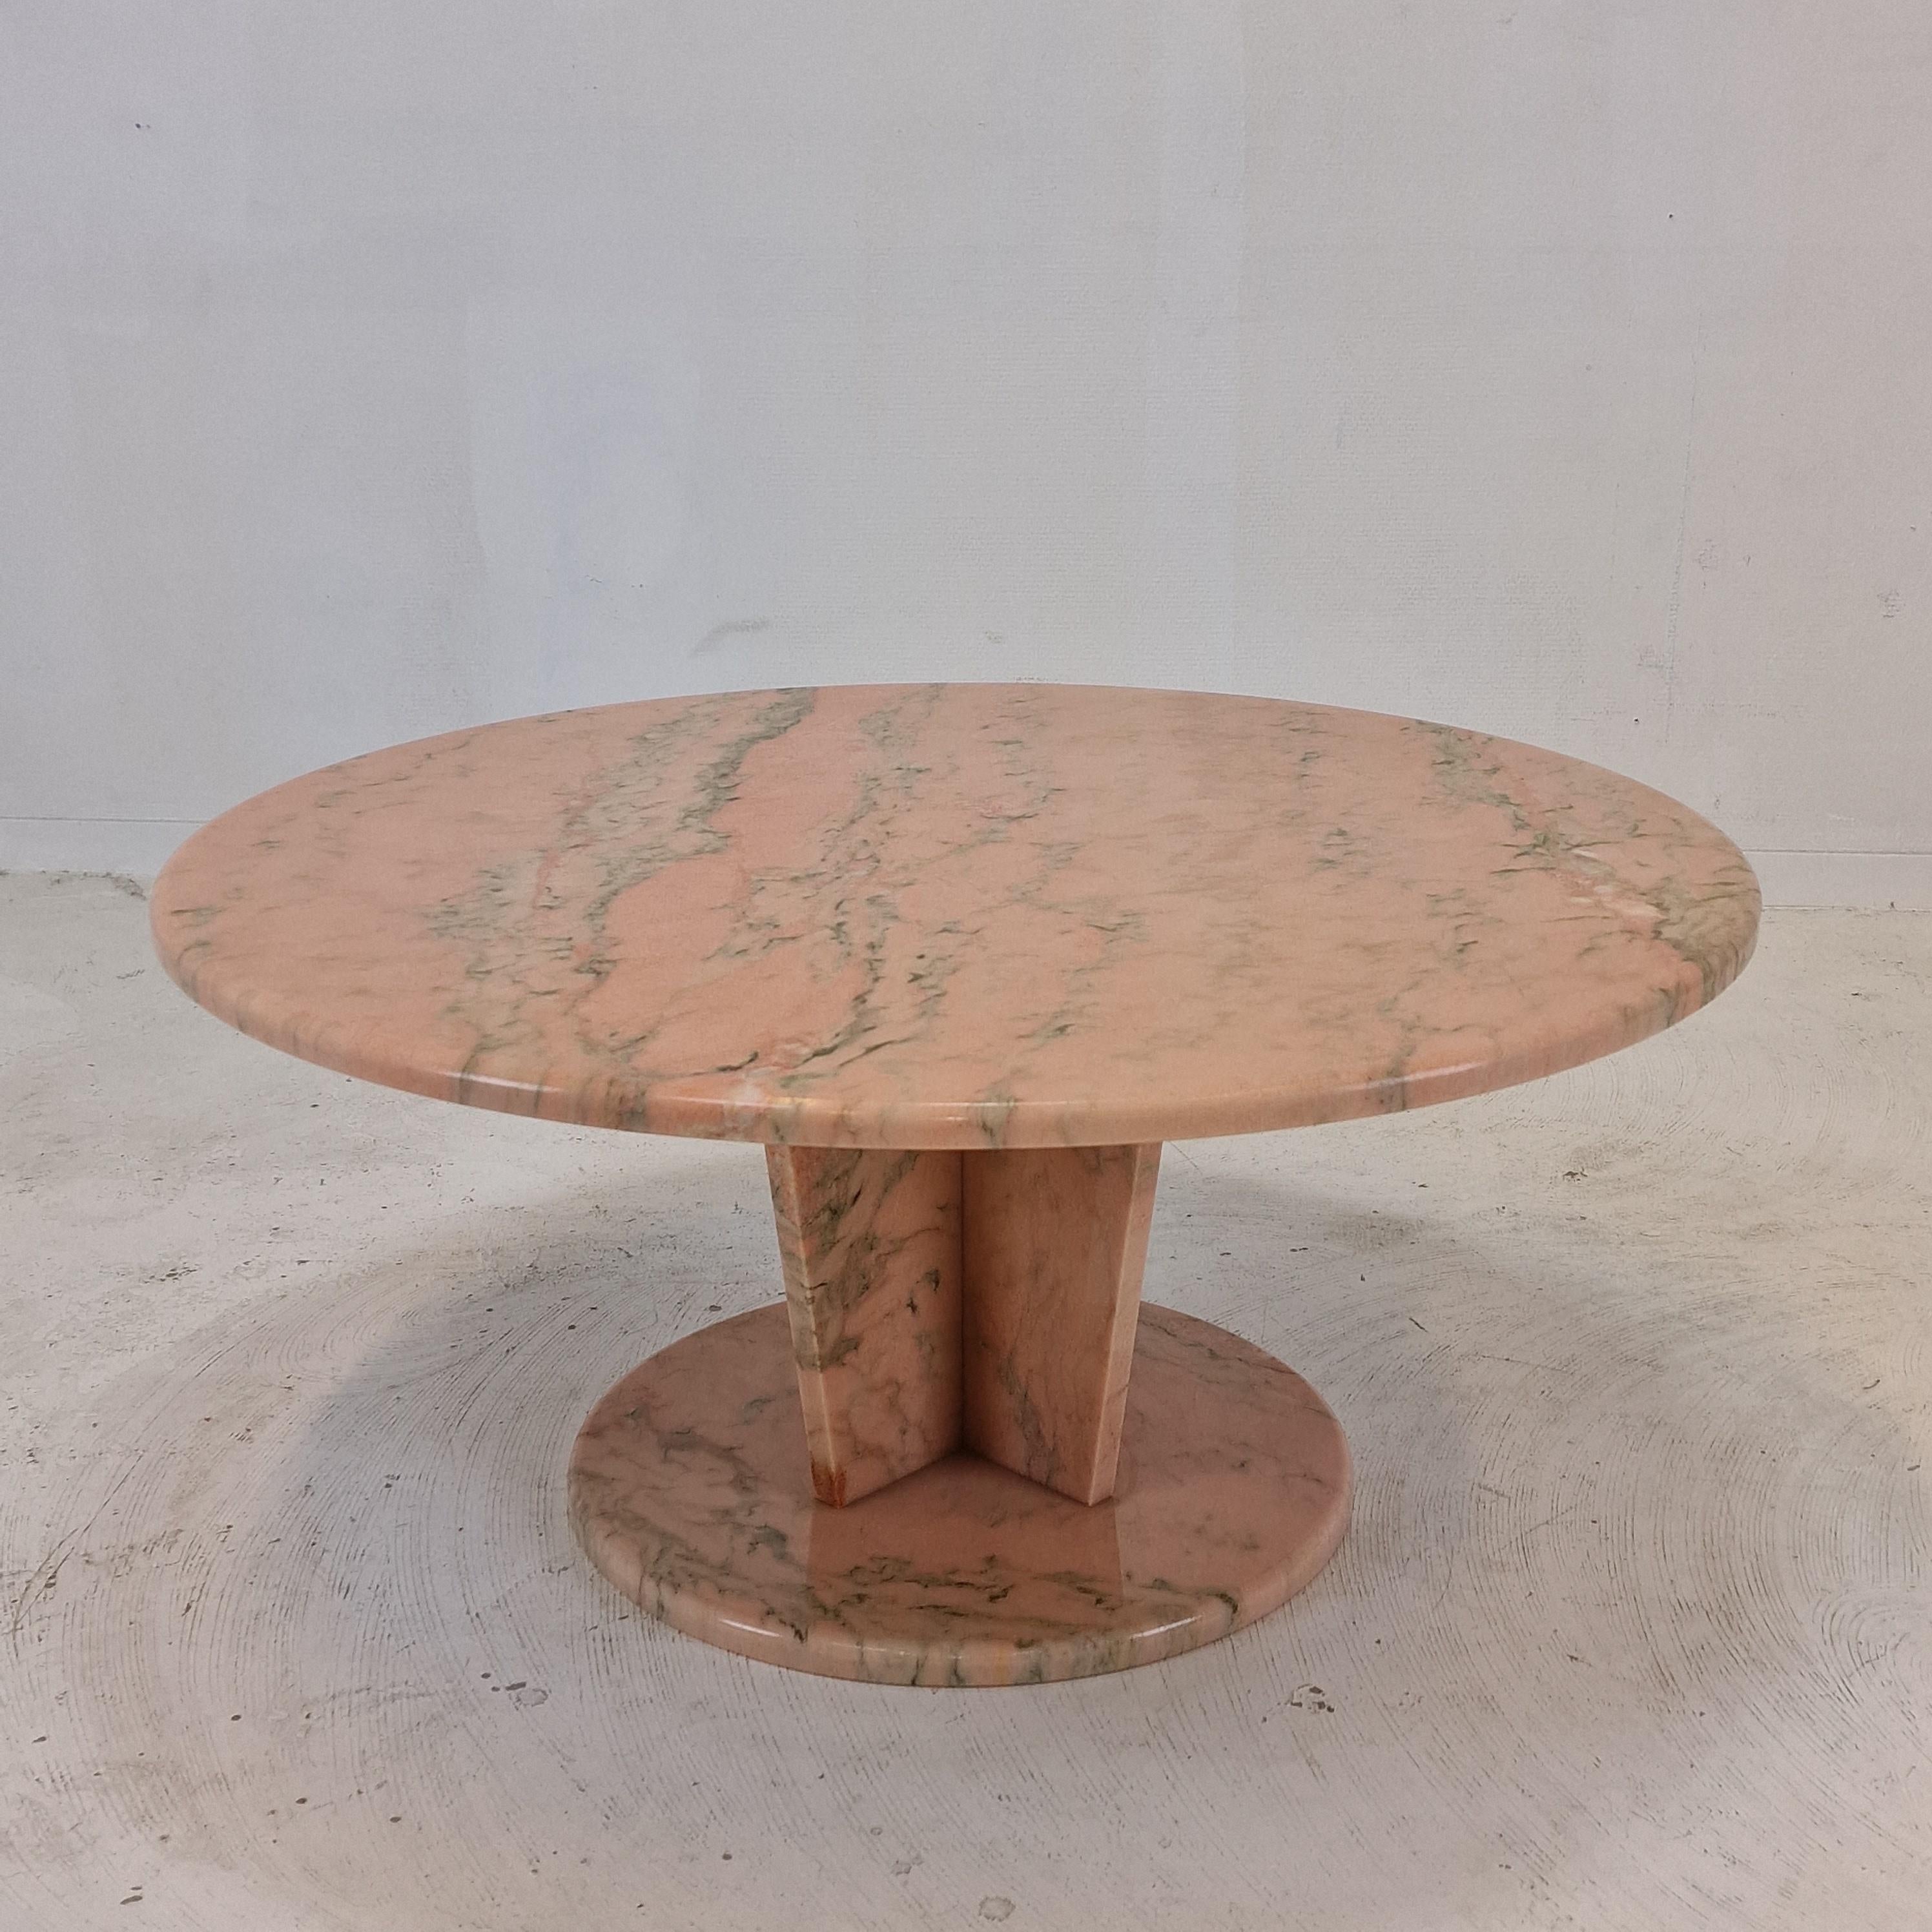 Stunning round Italian marble coffee or side table, fabricated in the 80's.

The fabulous marble features a beautiful pattern of different colors.

It is in very good condition, with the normal traces of use.

We work with professional packers and